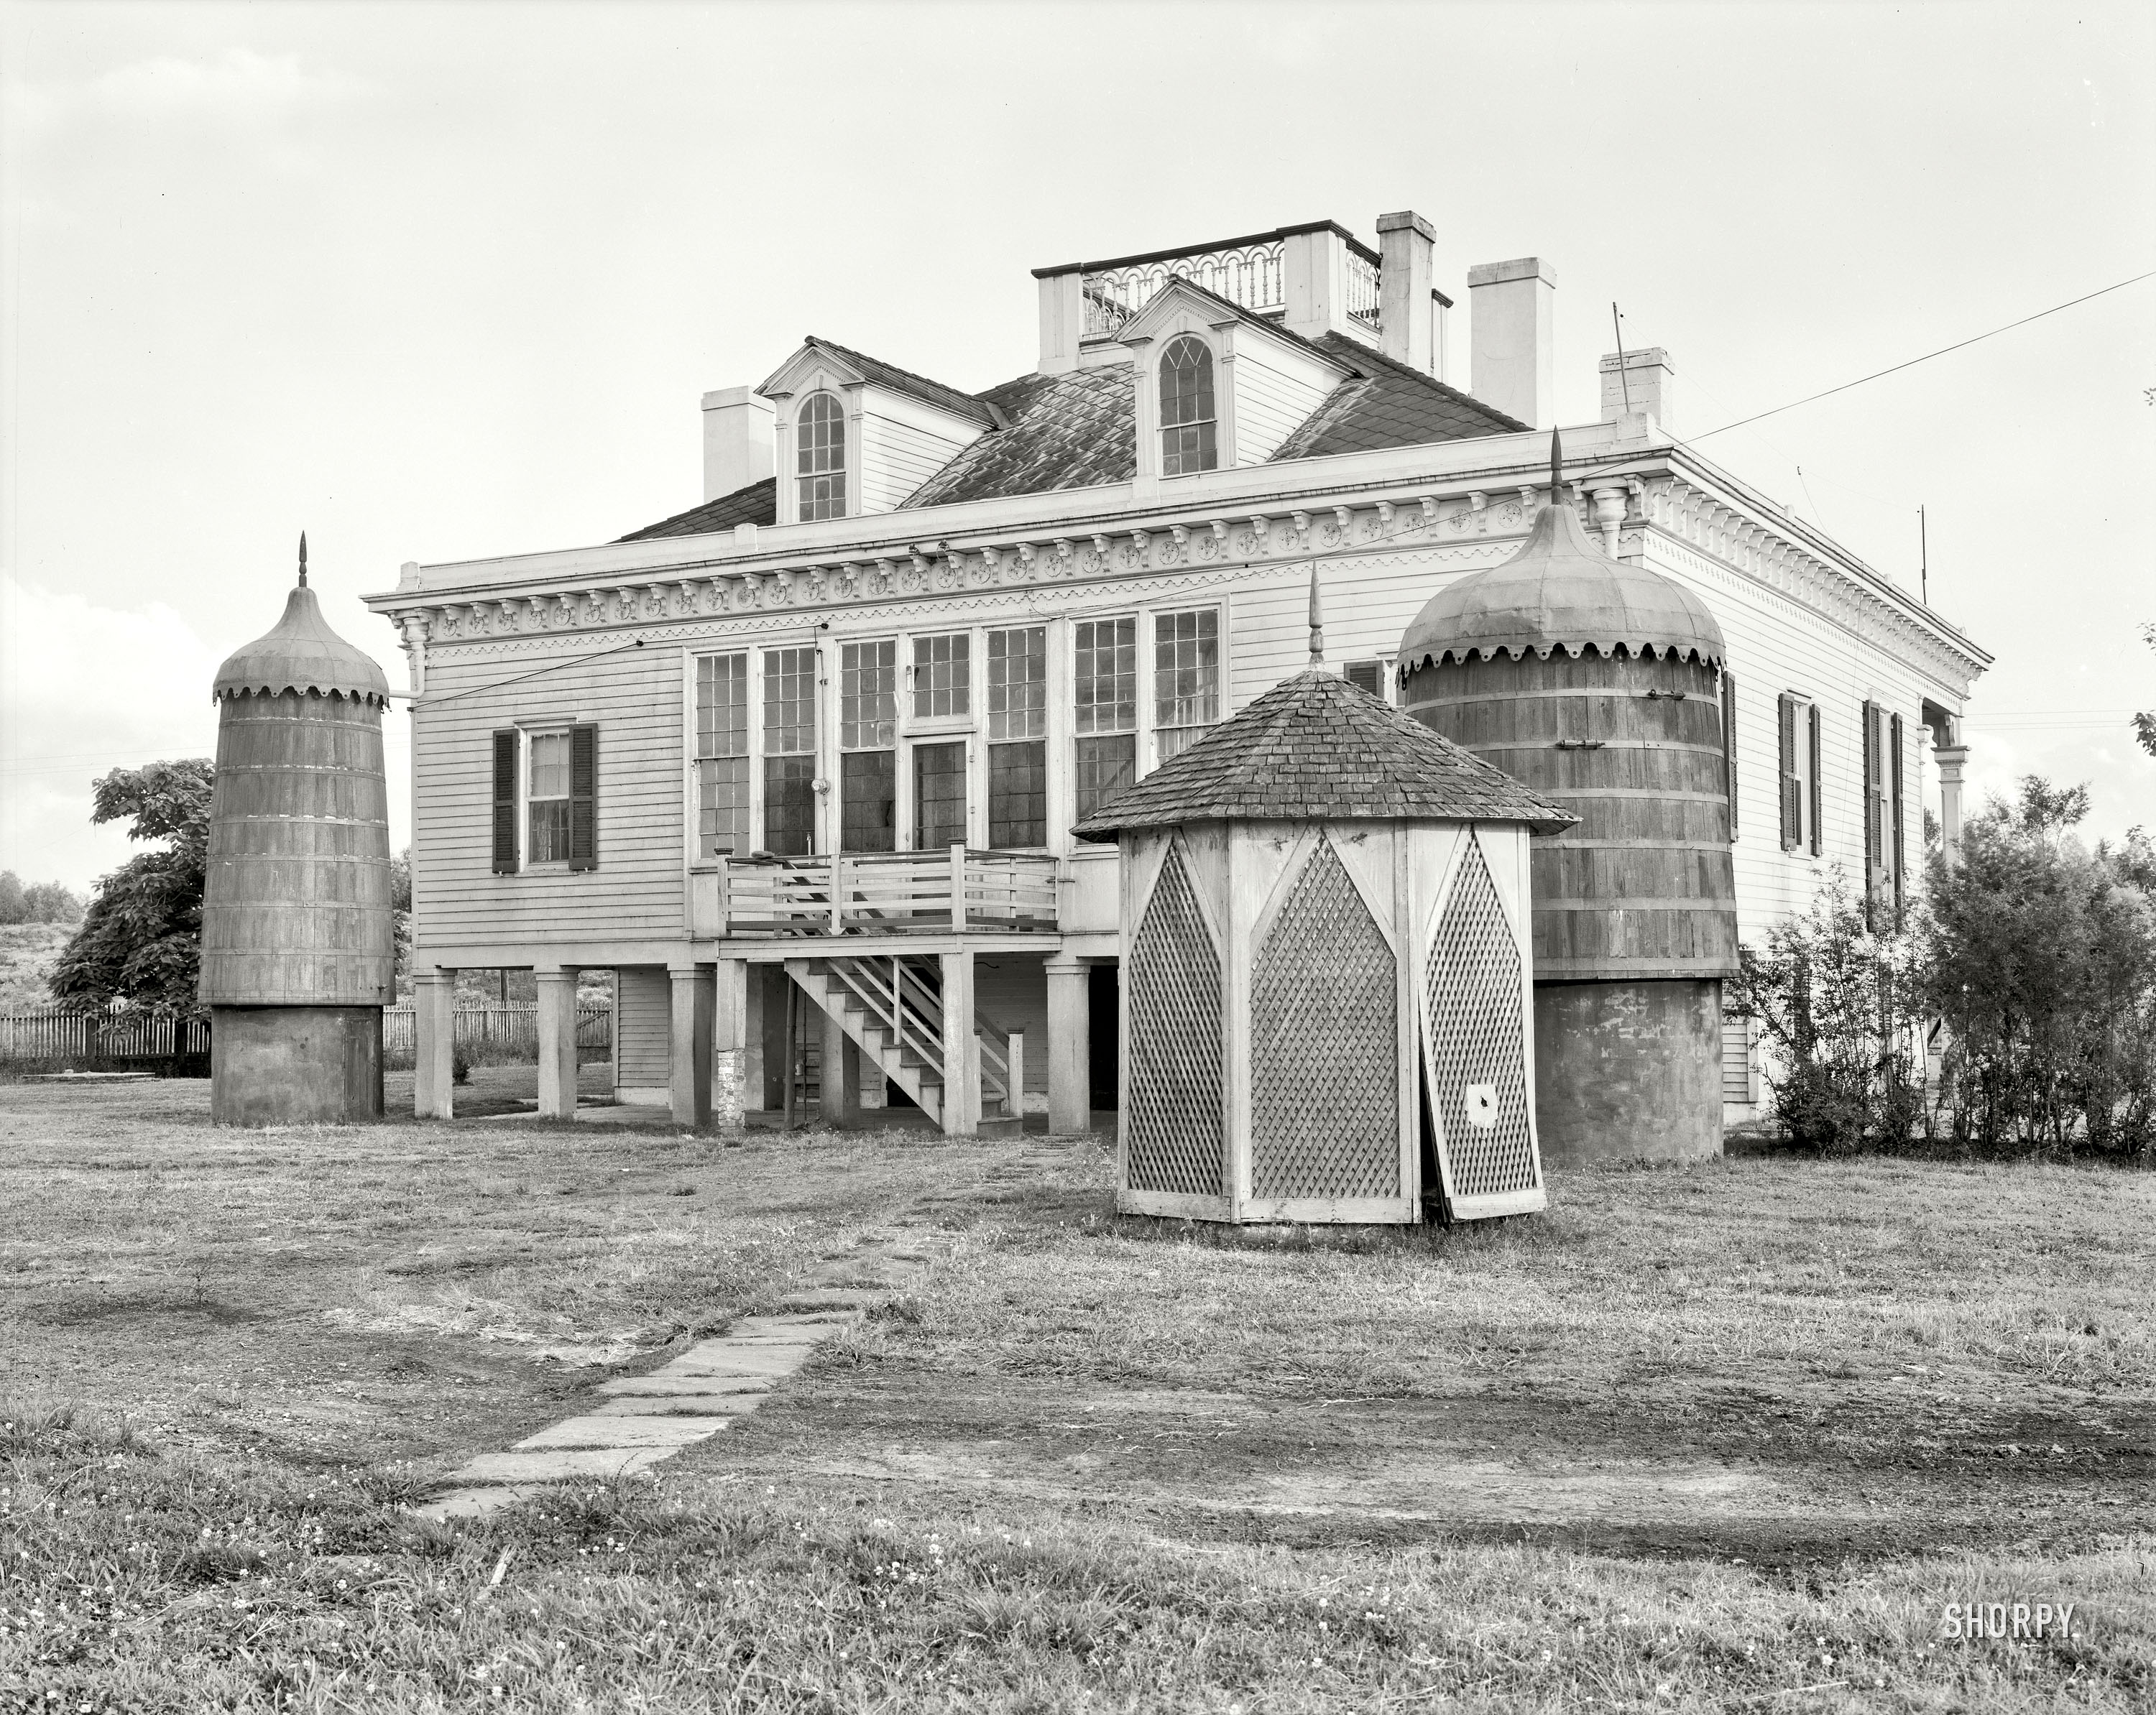 1938. "Mount Airy -- St. John the Baptist Parish, Louisiana." At Mount Airy, they're well fixed in the cistern department. I think they give the place a festive air. 8x10 inch acetate negative by Frances Benjamin Johnston. View full size.